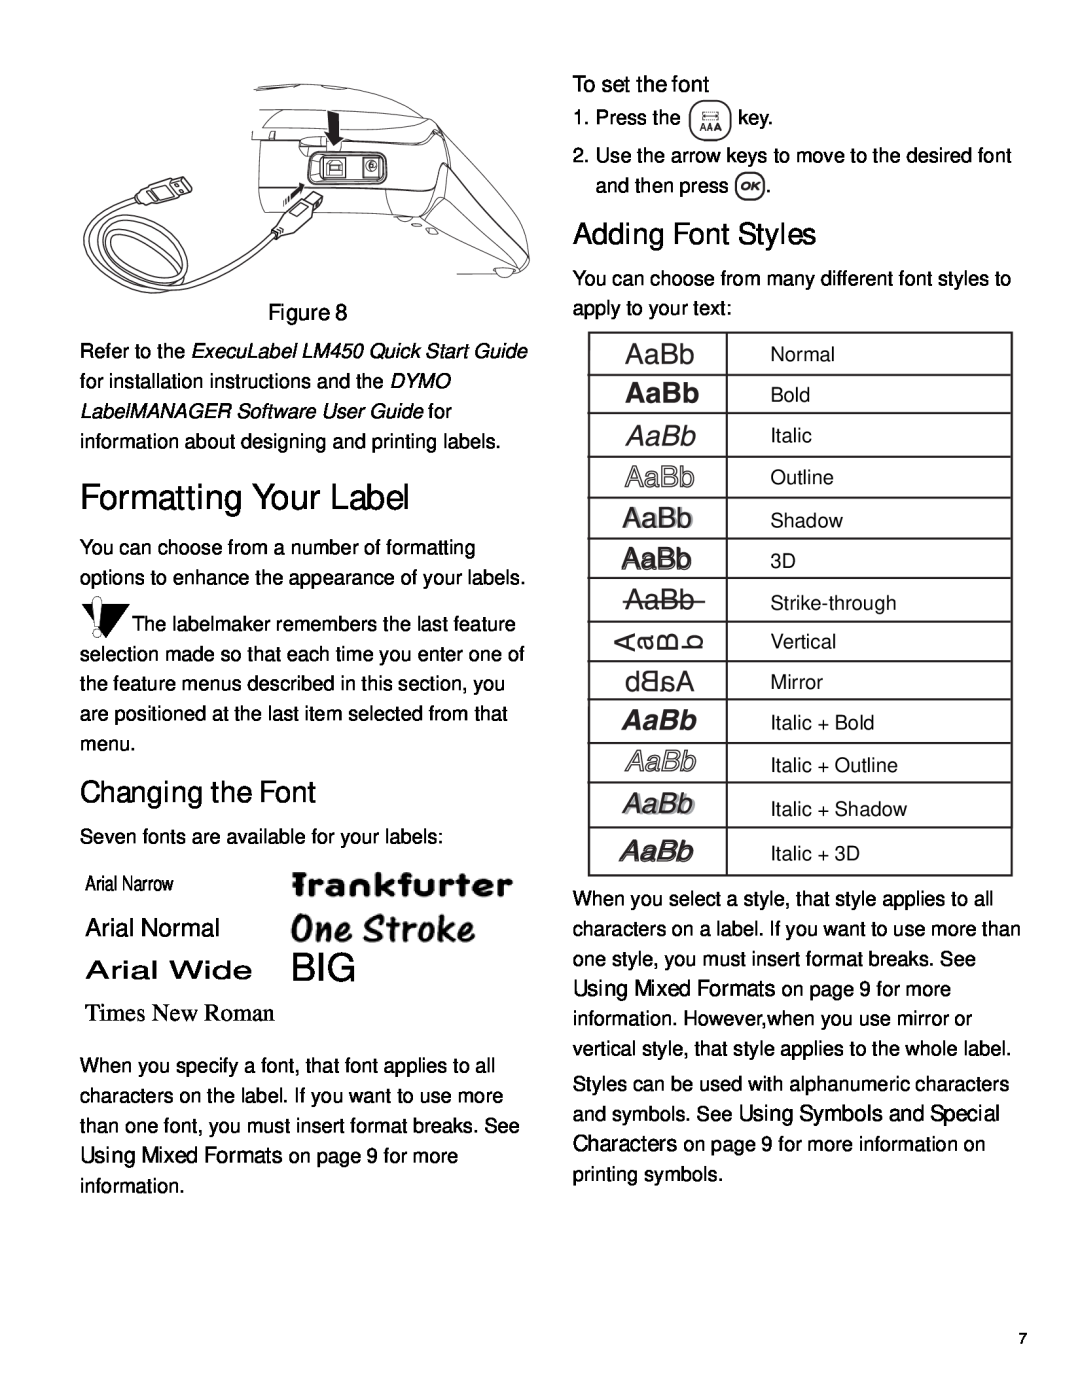 Dymo LM450 manual Formatting Your Label, Changing the Font, Adding Font Styles, To set the font, Times New Roman 